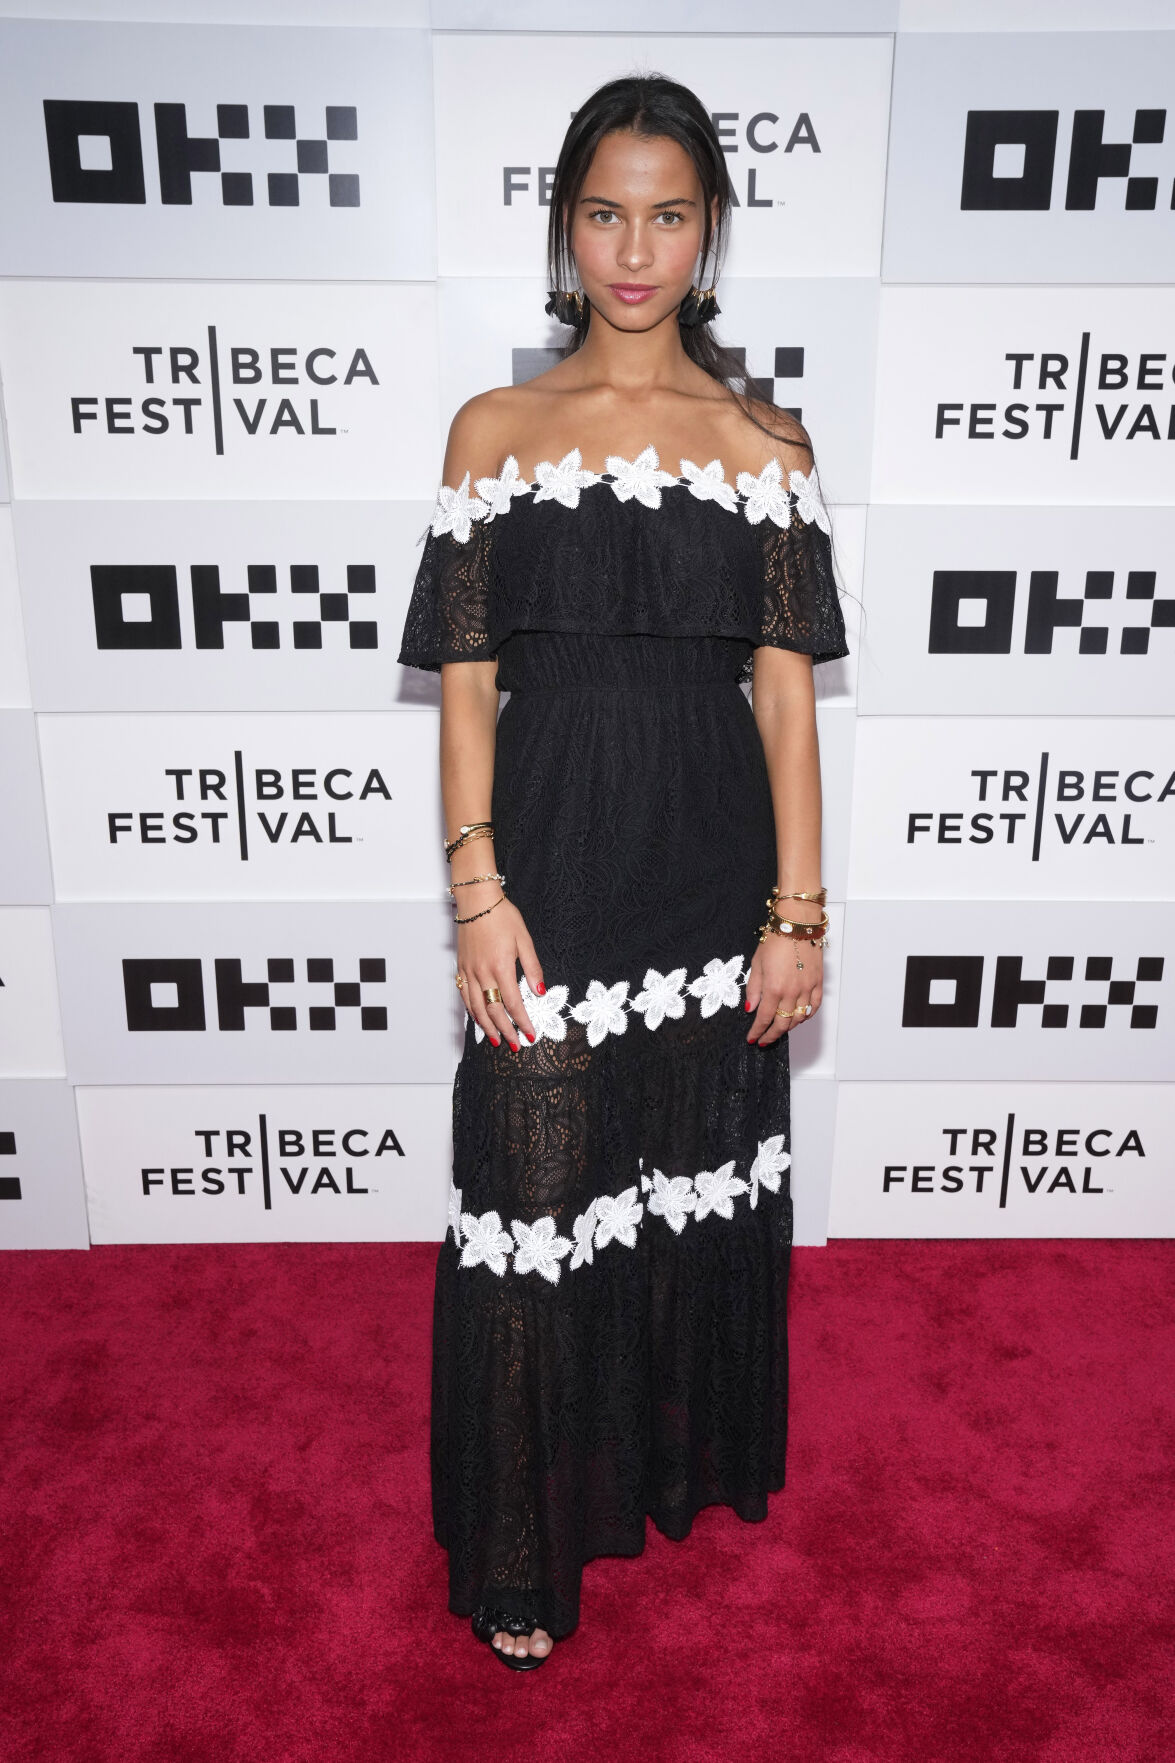 Ashley Aufderheide attends "The Perfect Find" premiere during the 2023 Tribeca Festival at BMCC Theater on June 14, 2023 in New York City.